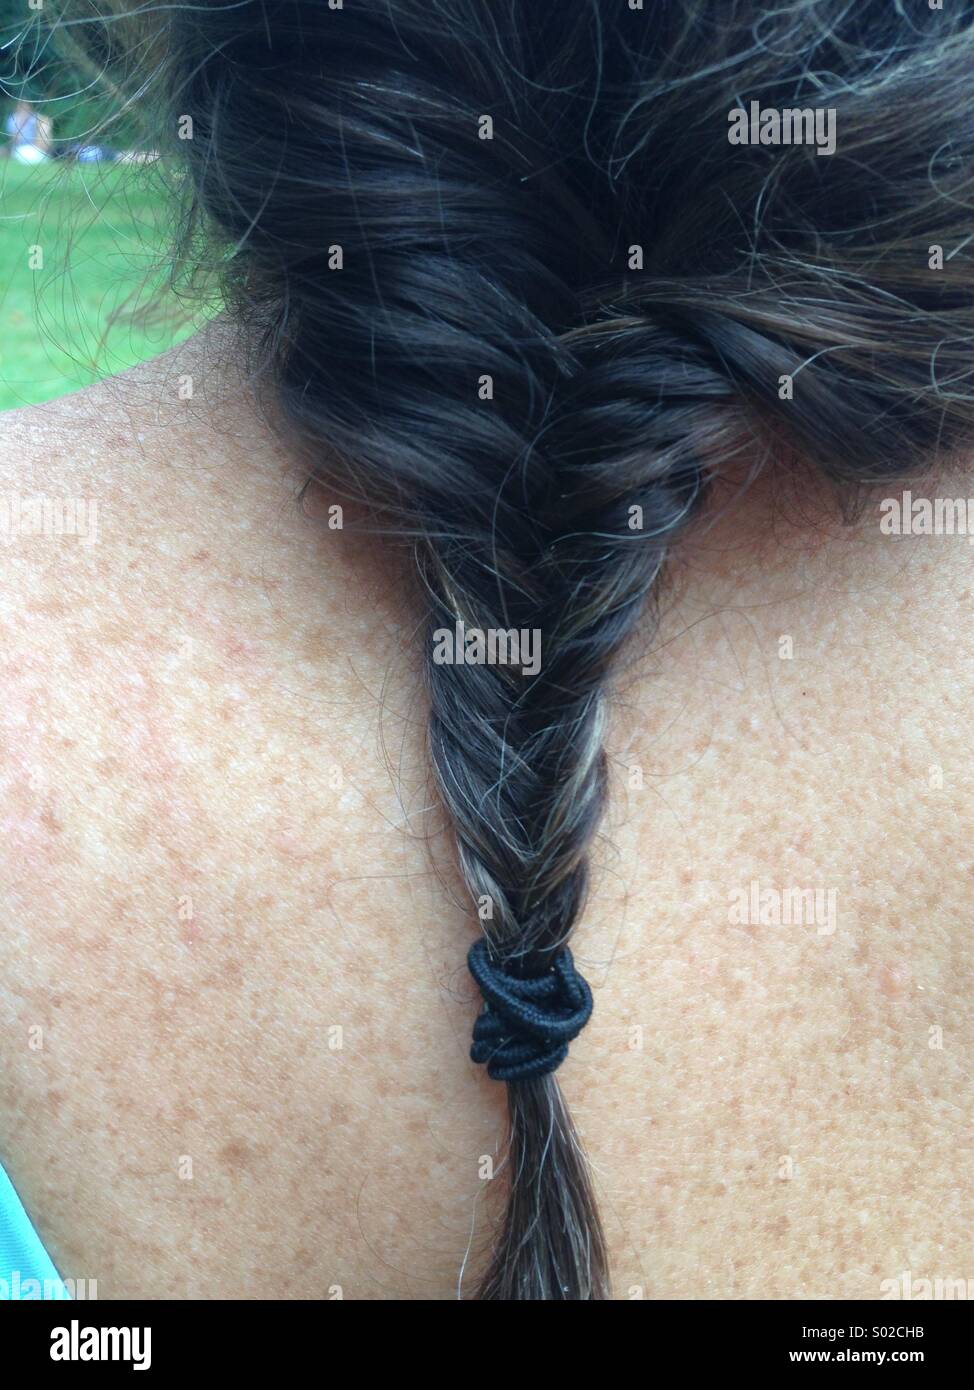 Hair in plait on woman's back with freckles Stock Photo